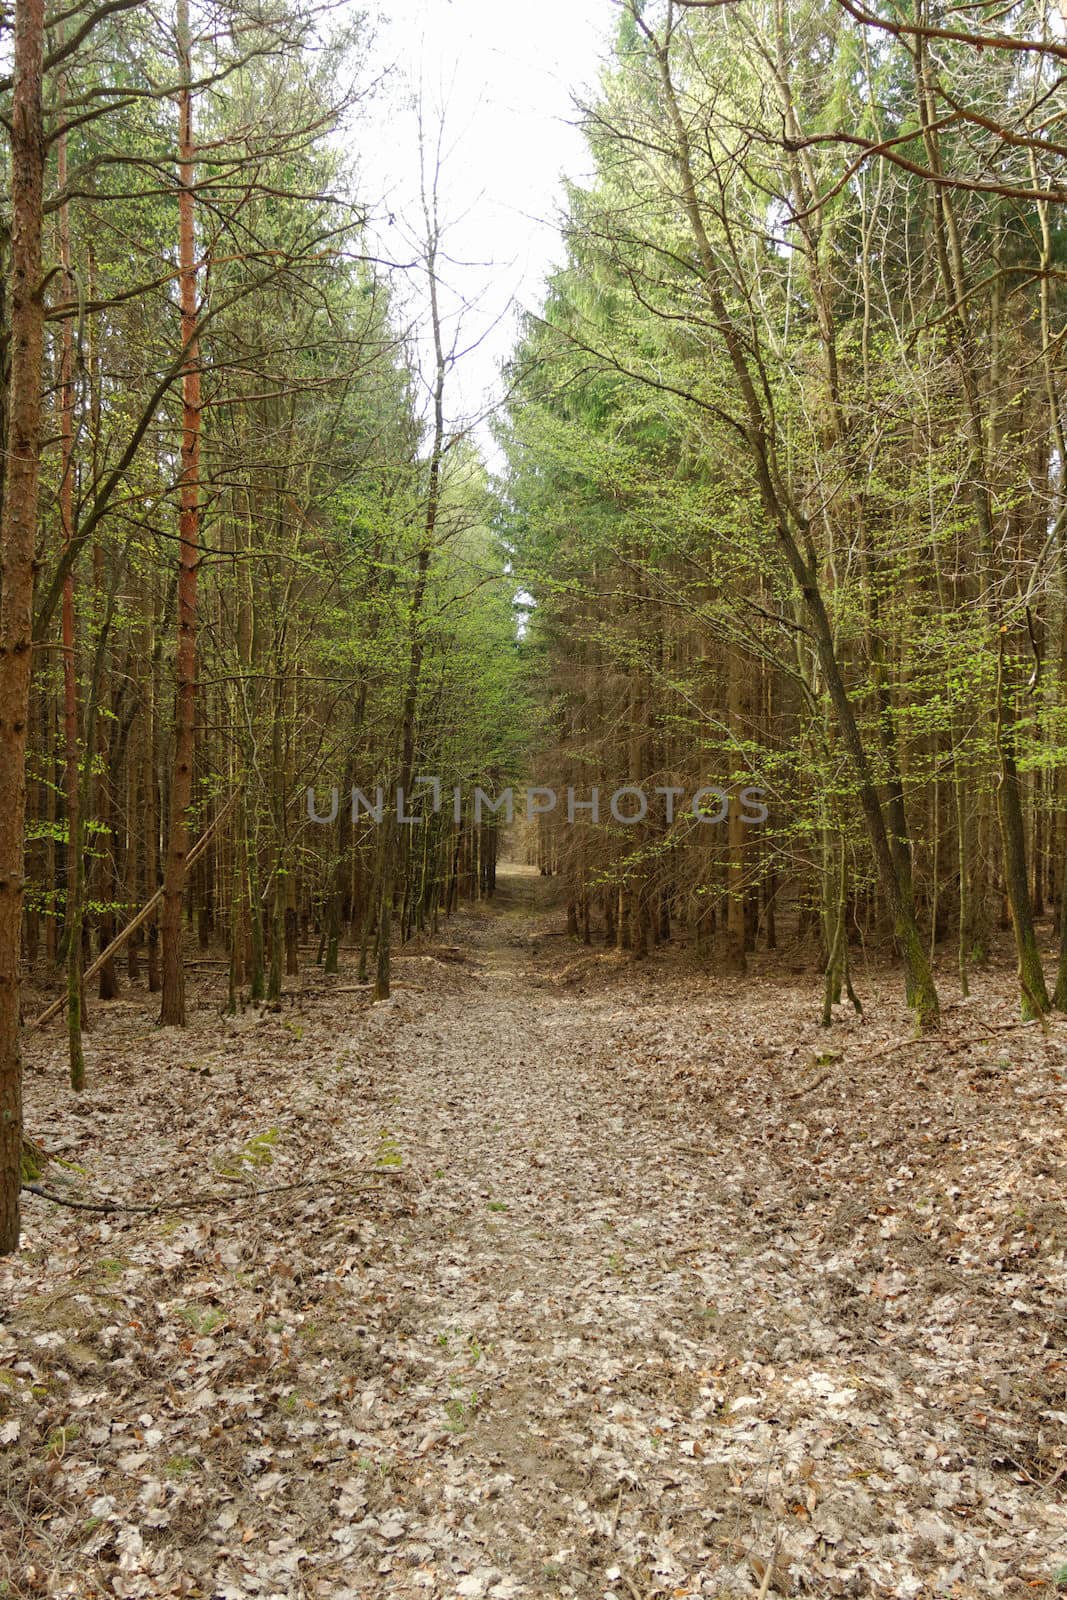 dirt road in the forest by NagyDodo